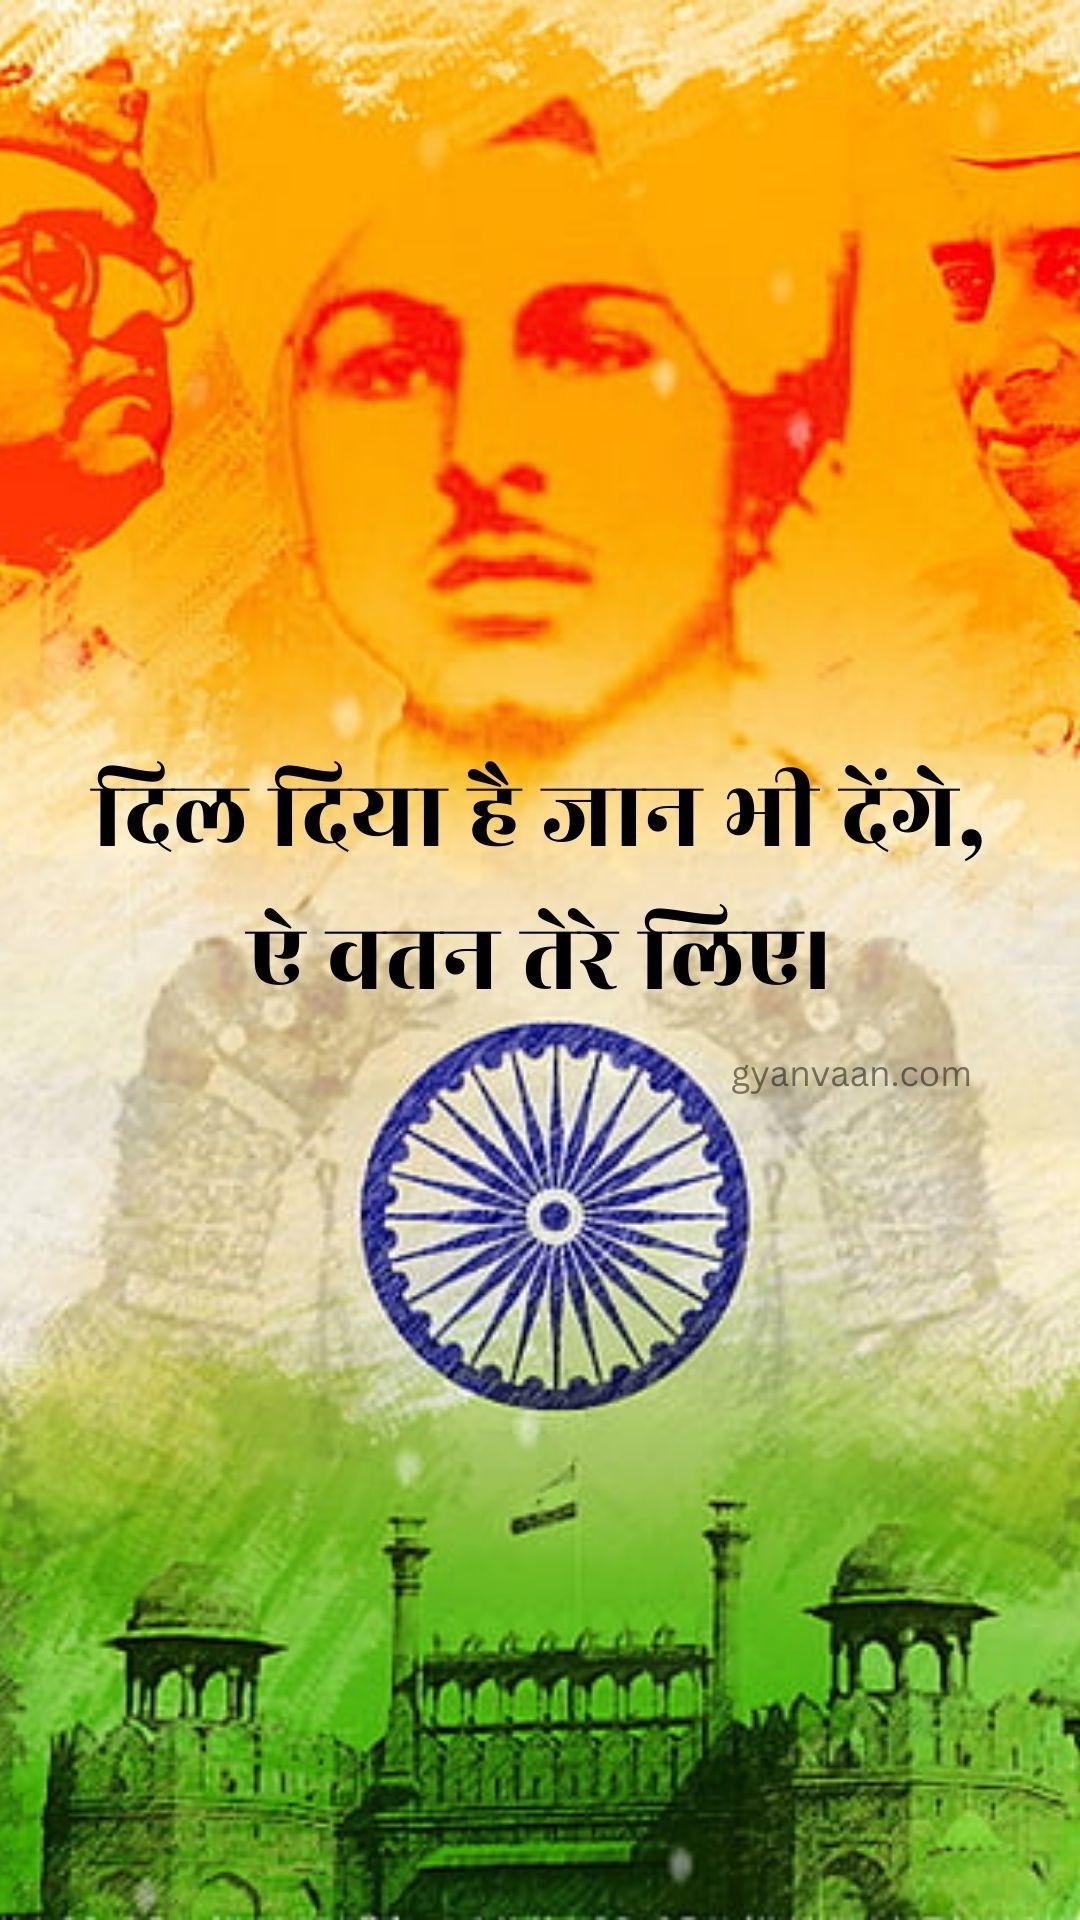 Independence Day Quotes In Hindi With Shayari Slogan Wishes For Whatsapp Status Mobile 17 - Independence Day Quotes In Hindi